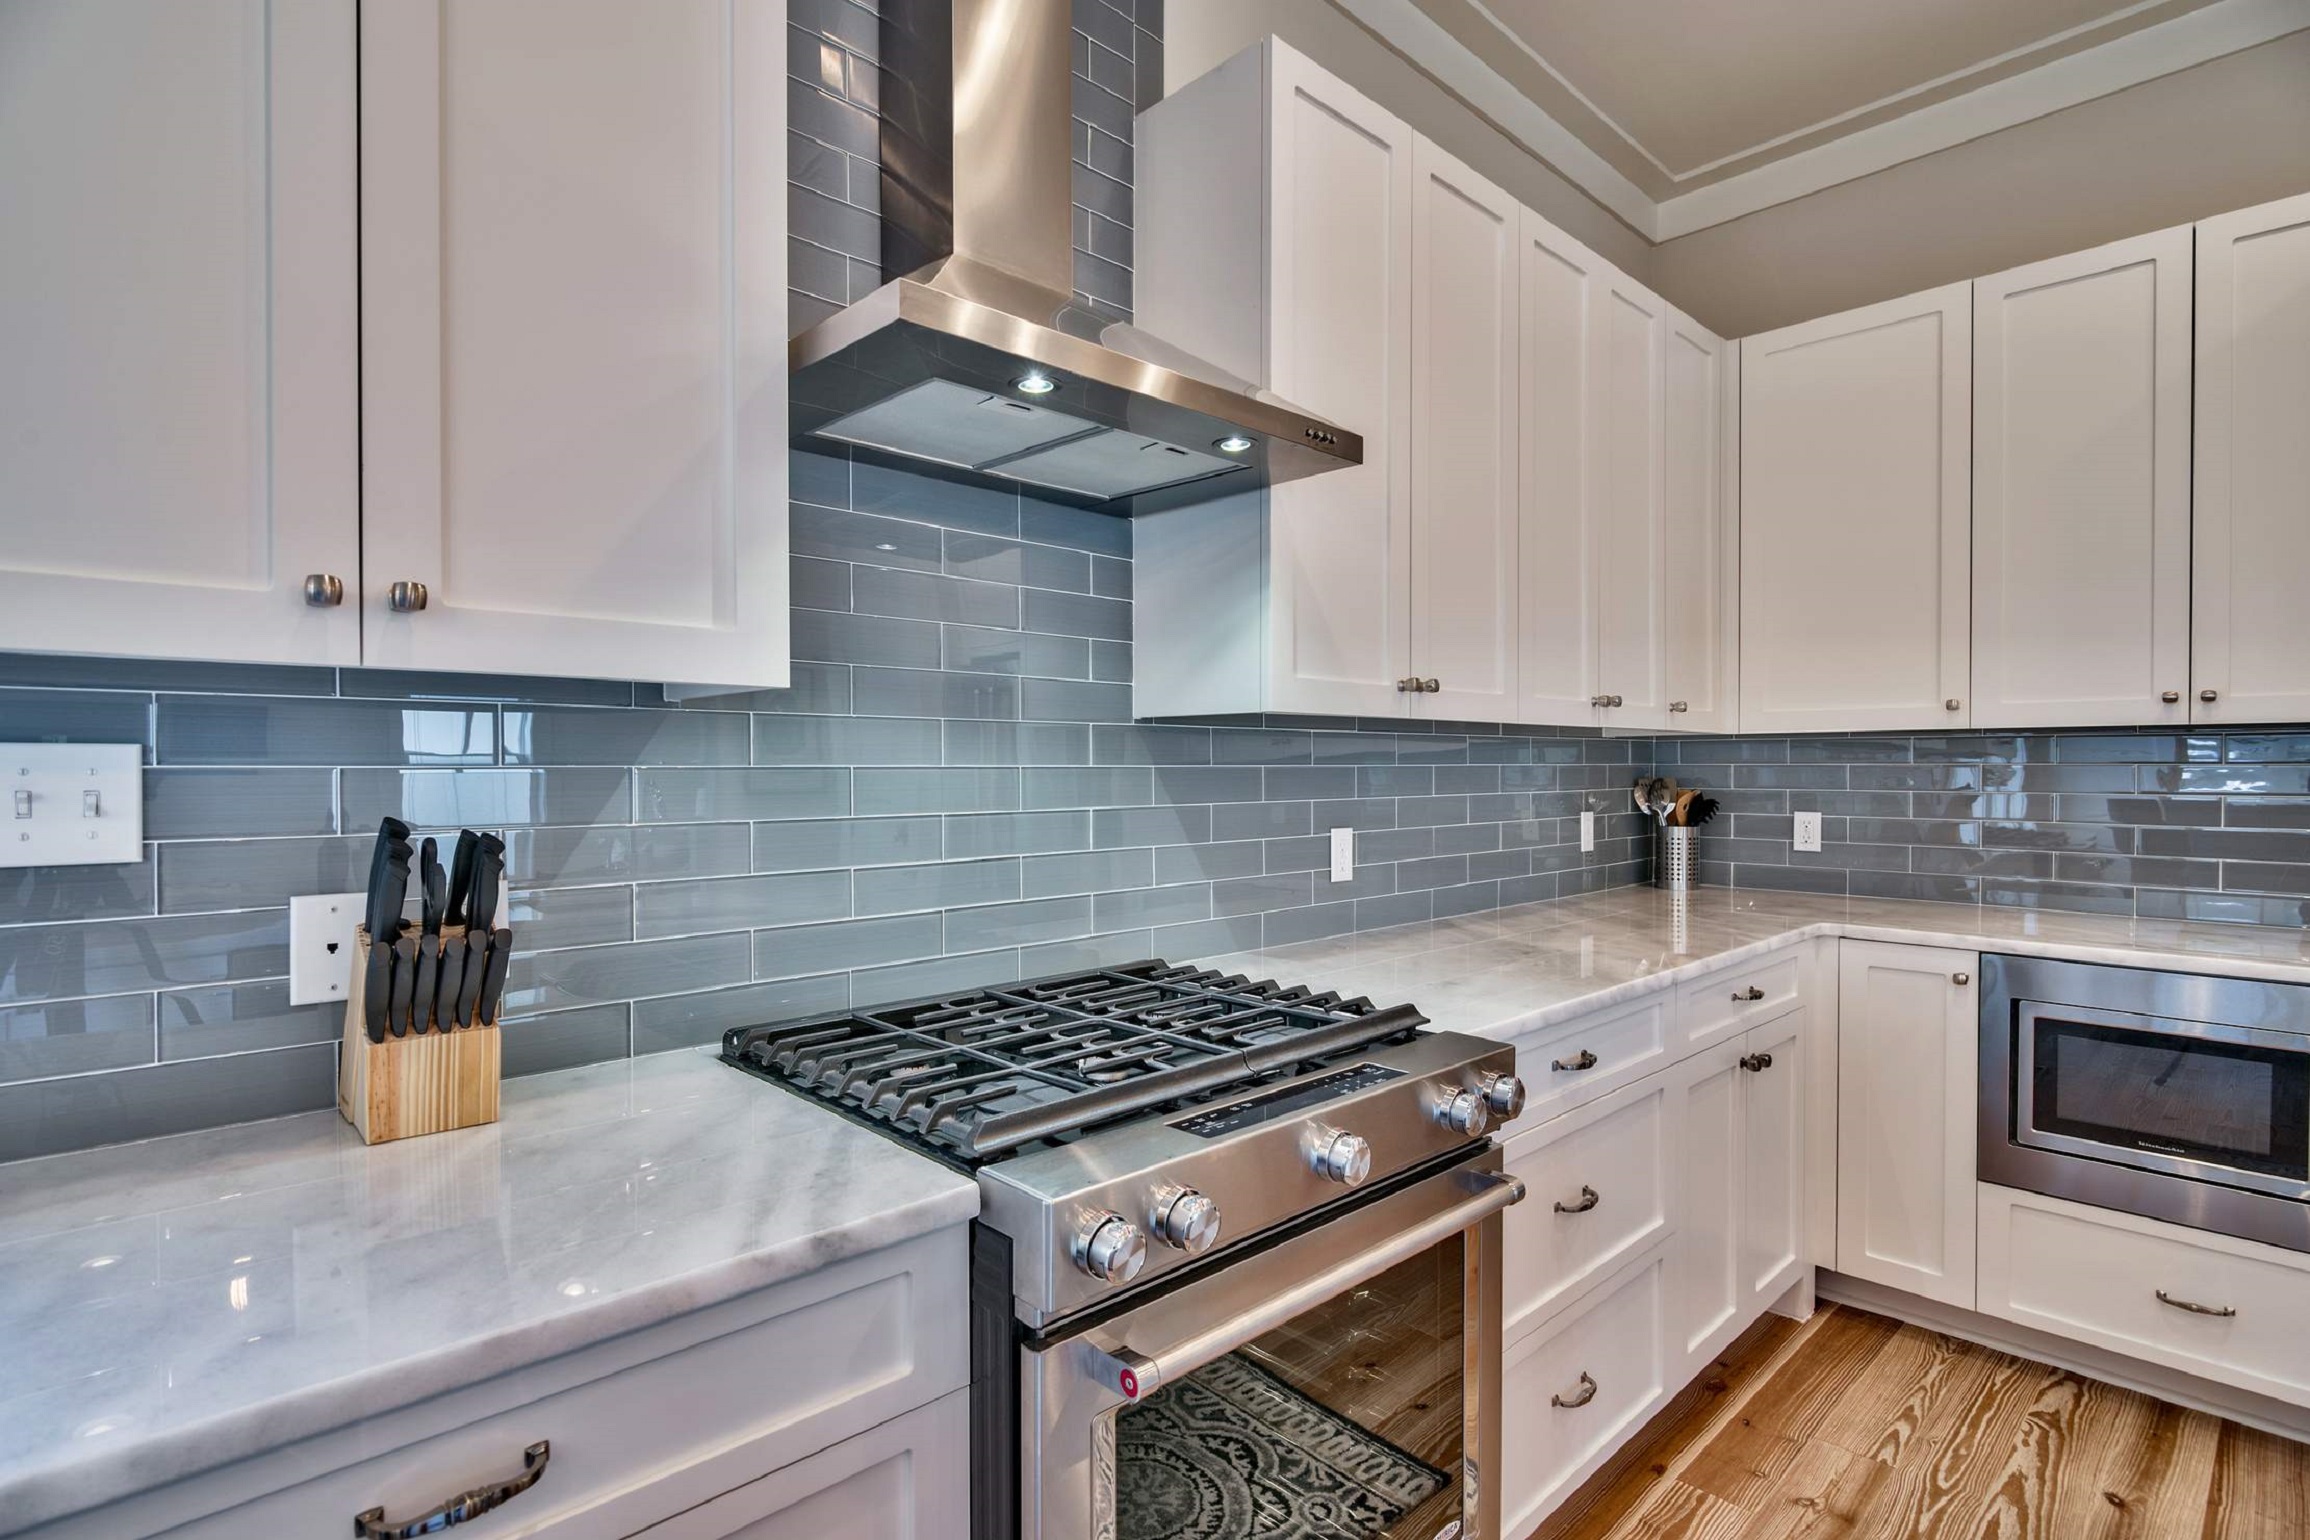 Stainless steel and granite in the Kitchen